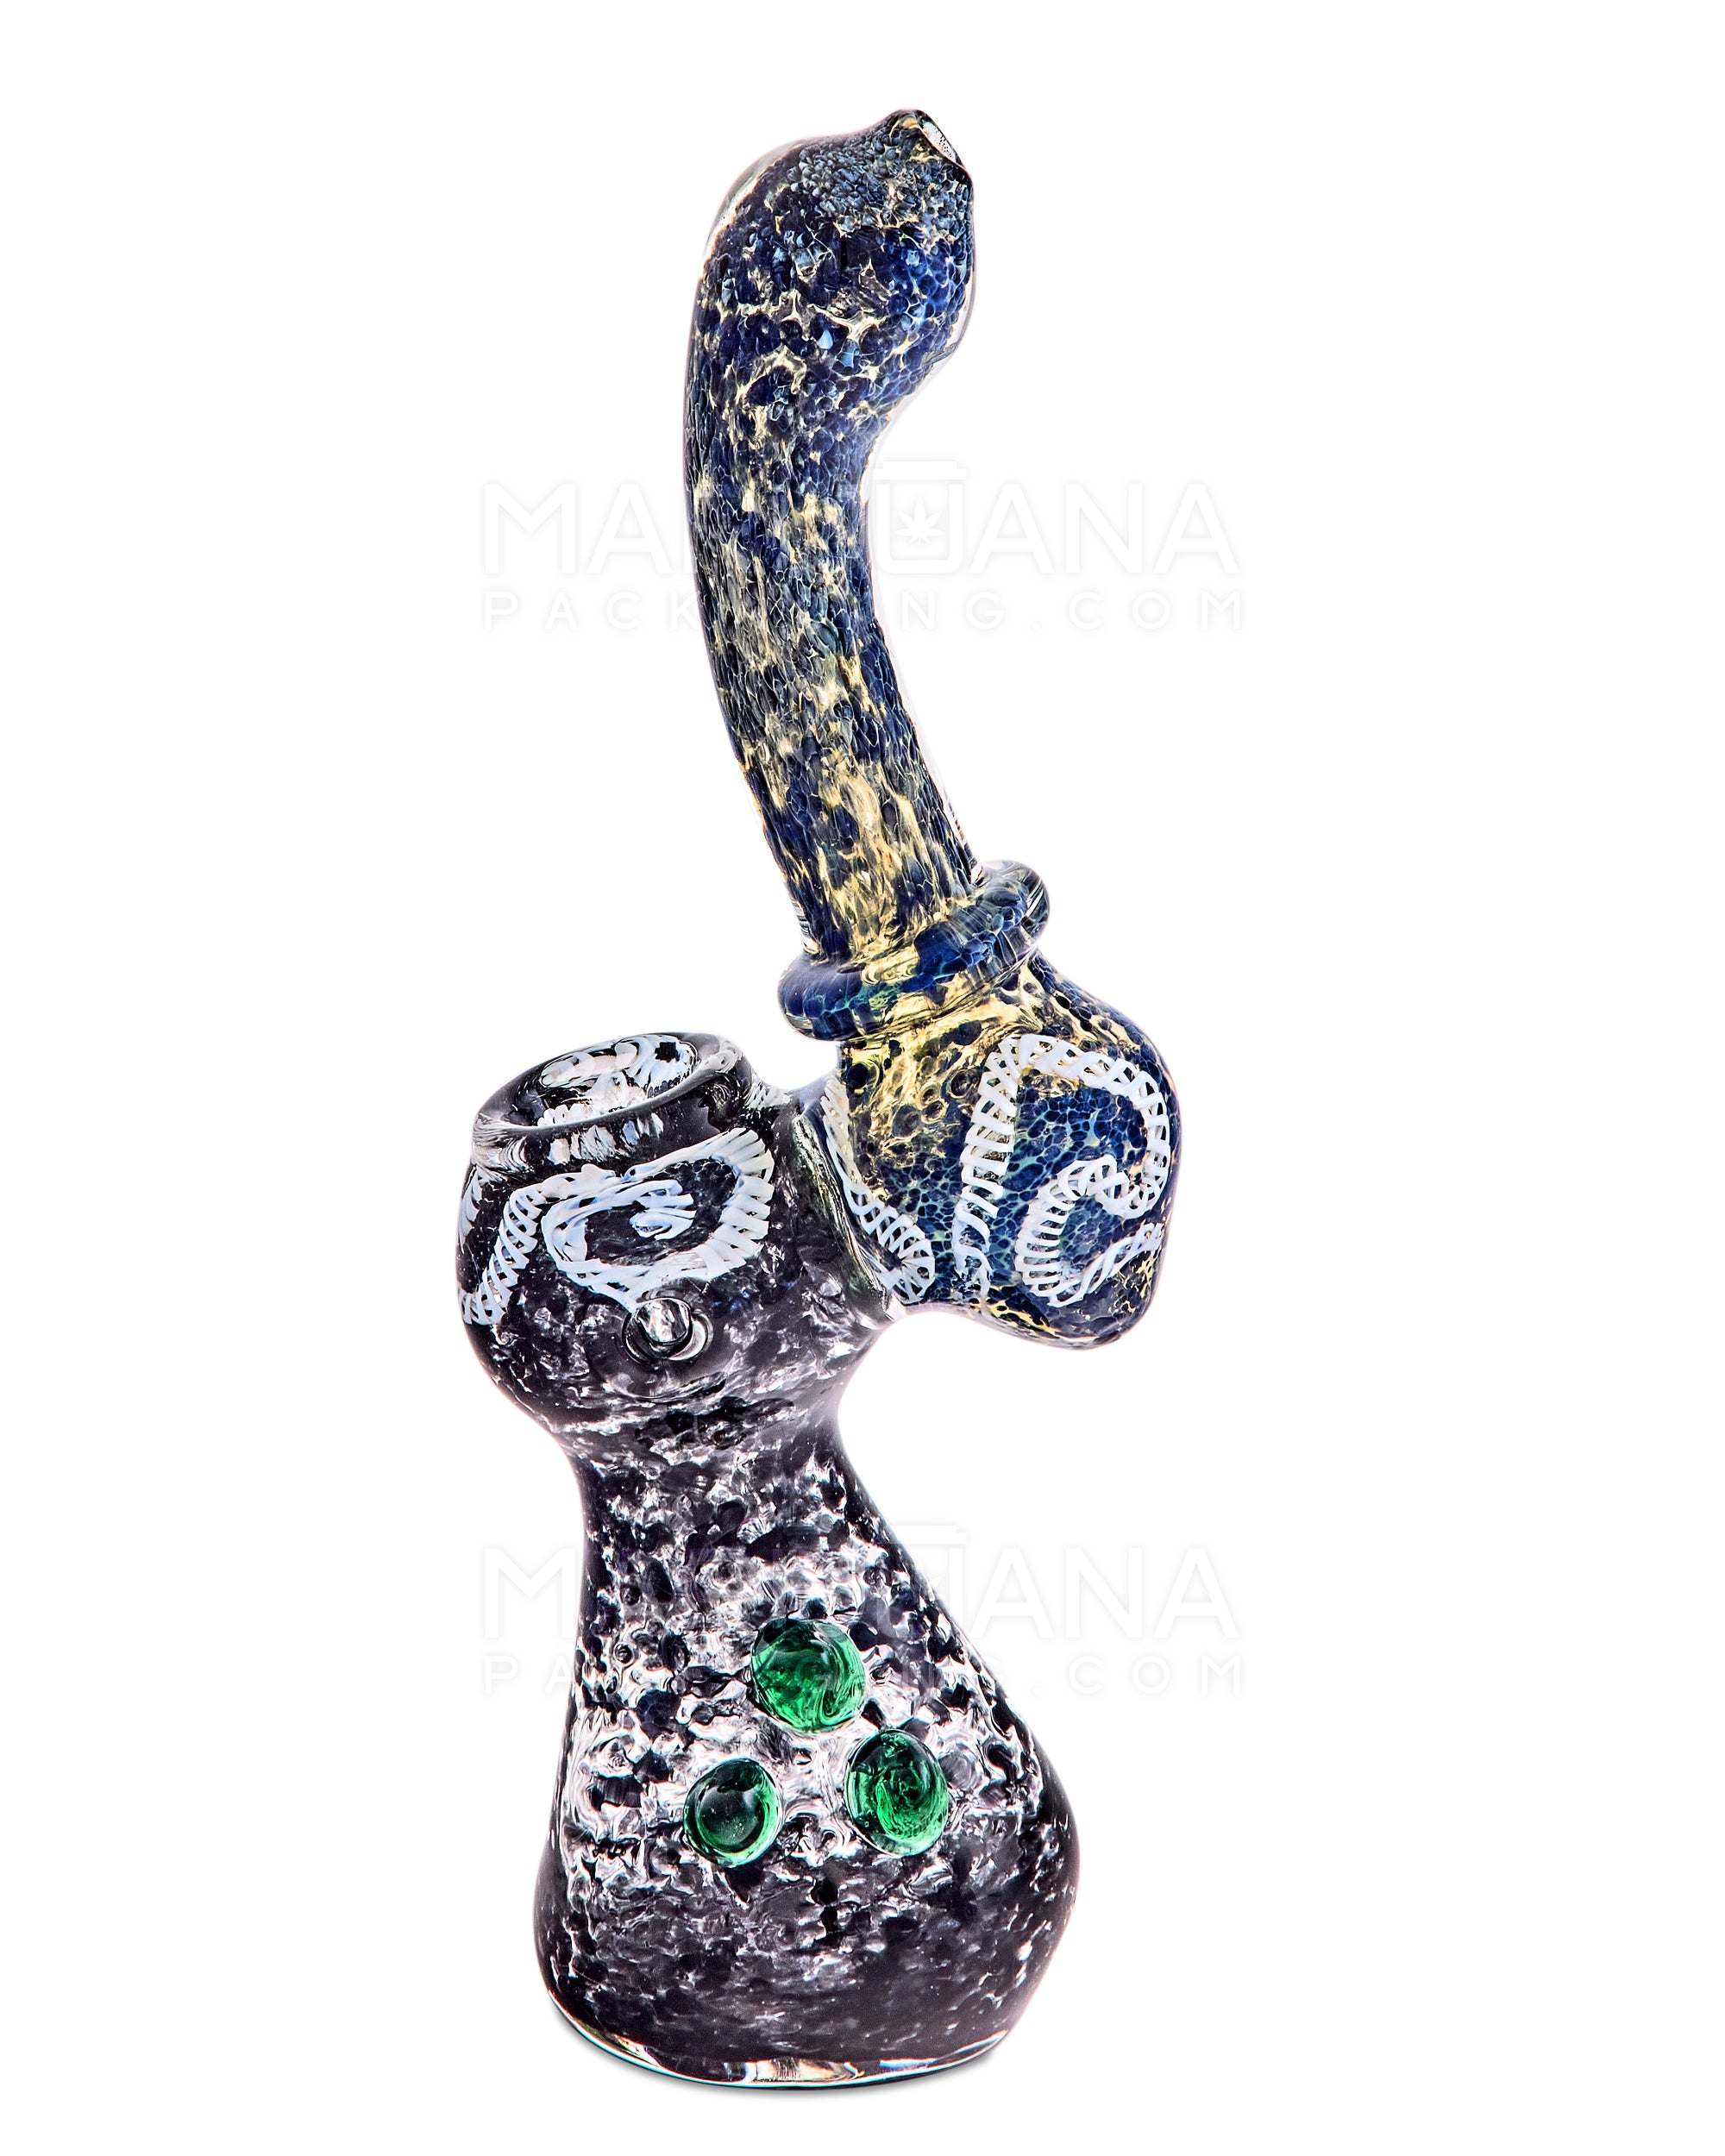 Frit & Gold Fumed Ringed Bubbler w/ Ribboning & Triple Knockers | 8in Tall - Glass - Blue - 7